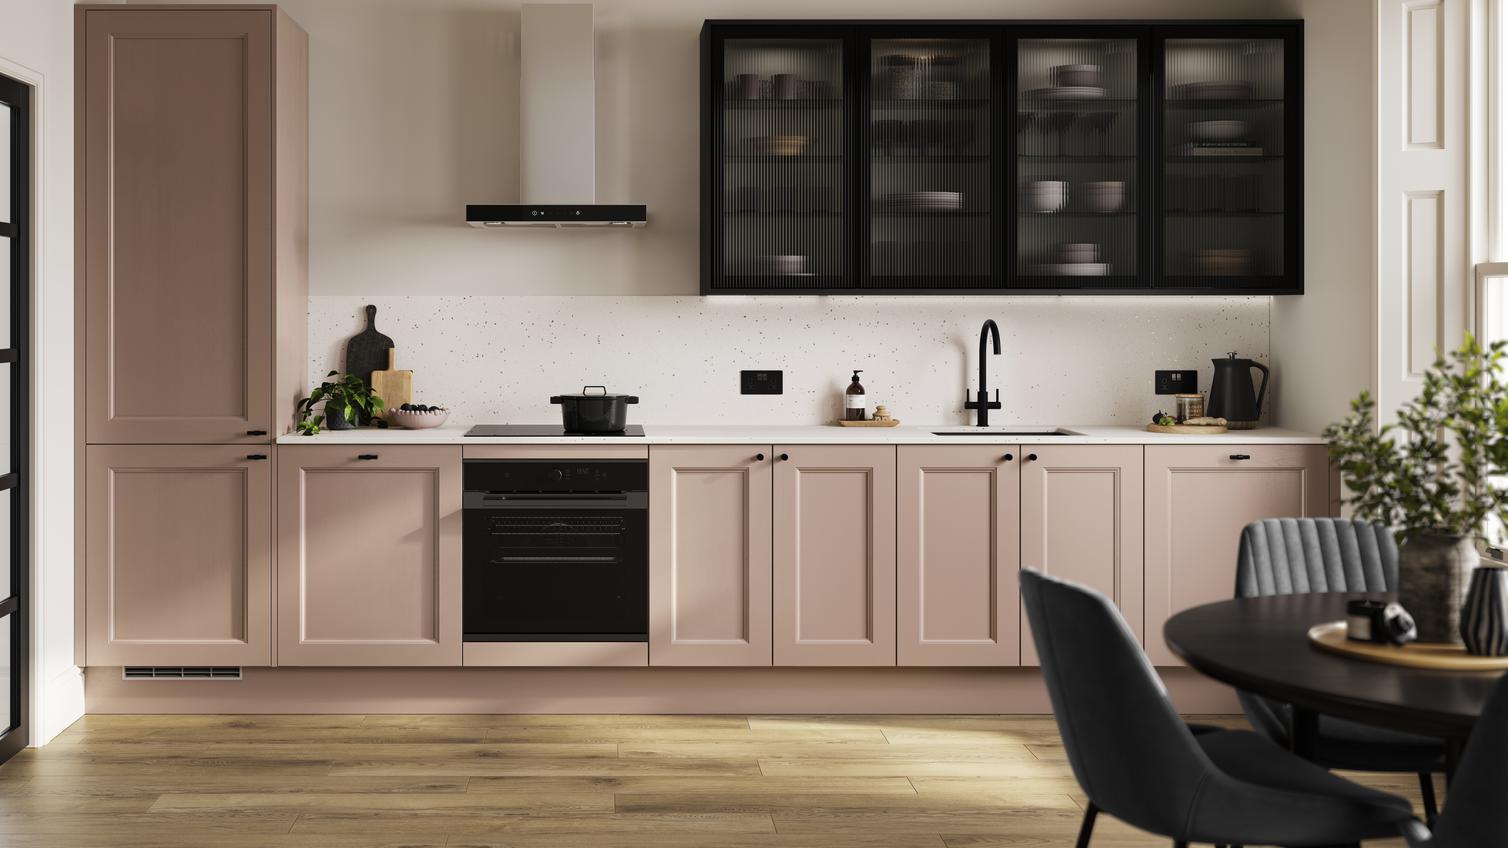 An antique-rose pink shaker kitchen in a single-wall layout. There are black glass wall cabinets and single-plank flooring.